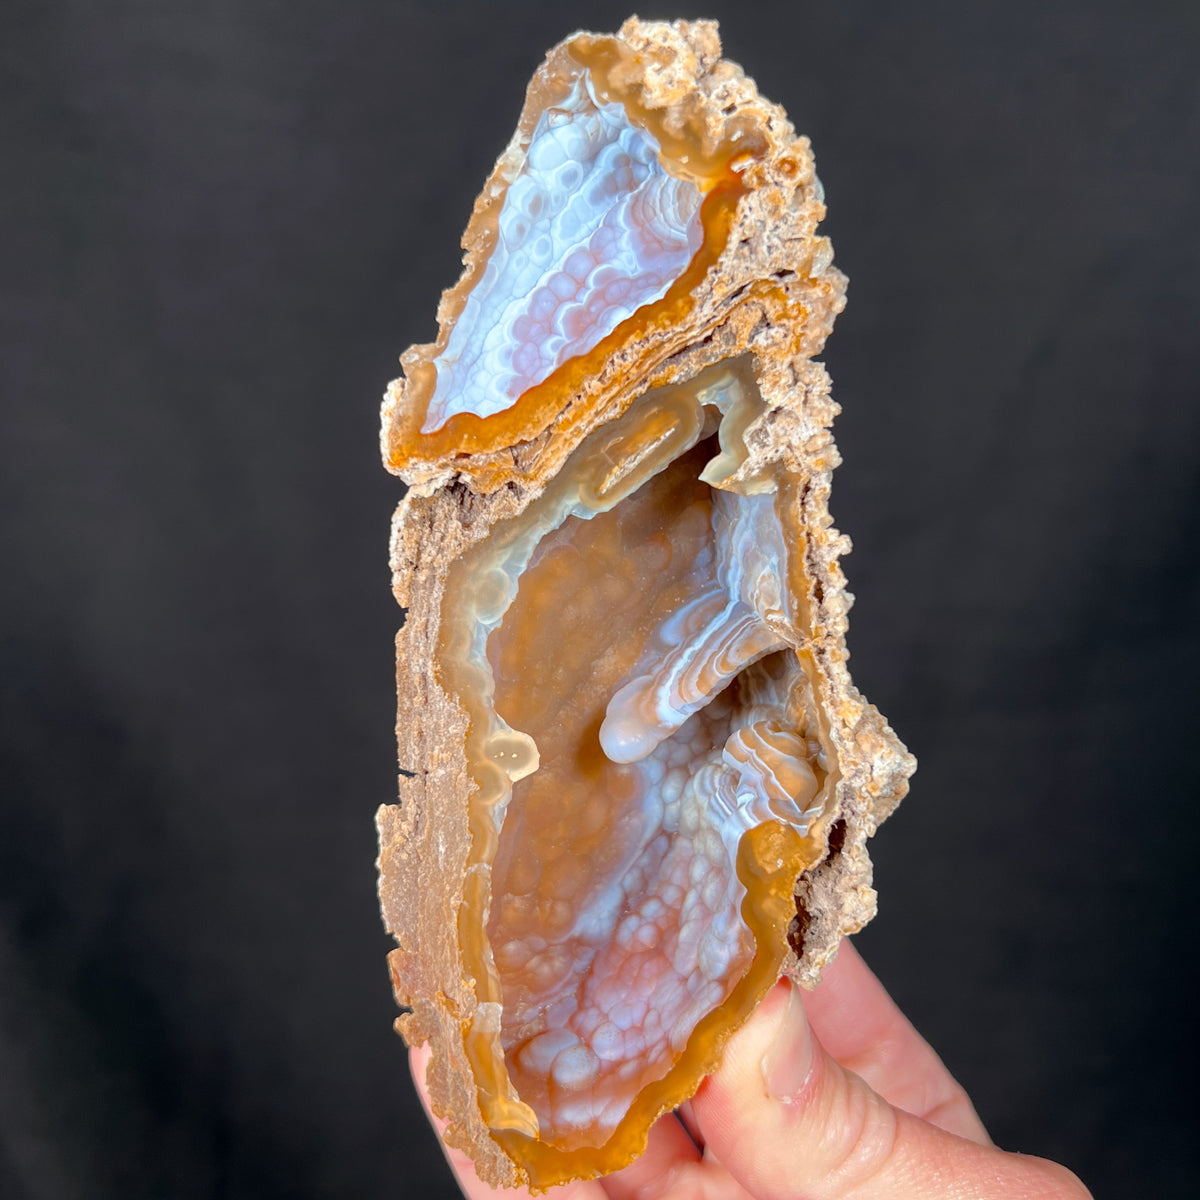 Interior of Fossilized Coral Pair with Chalcedony Crystals